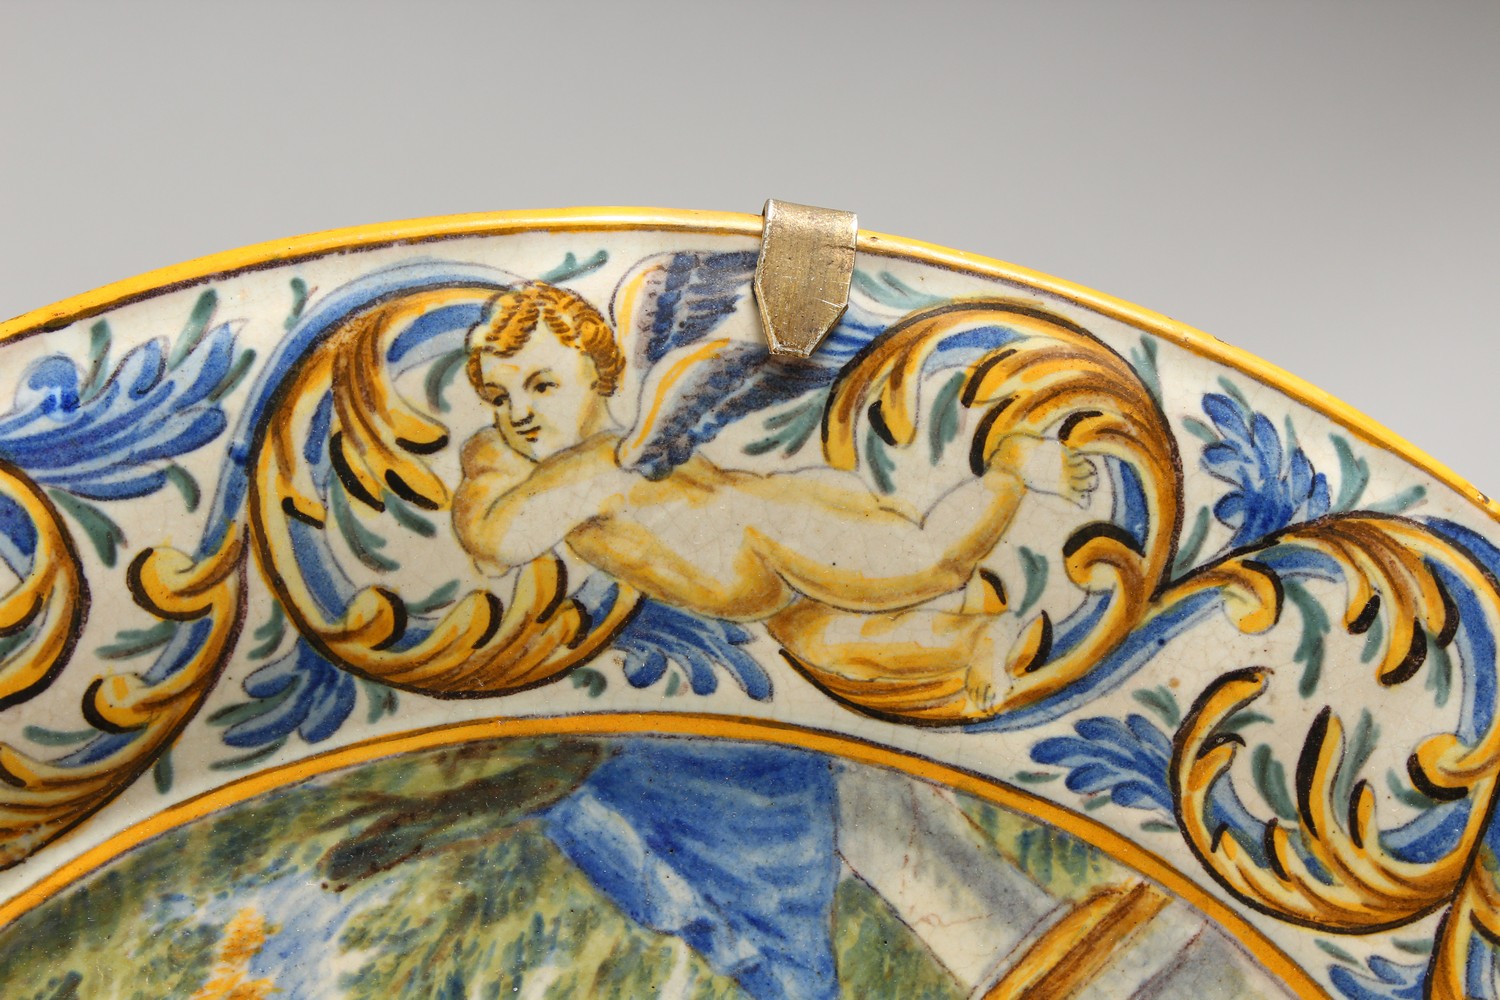 A LARGE ITALIAN MAJOLICA CHARGER with an allegorical scene. 18ins diameter. - Image 4 of 6